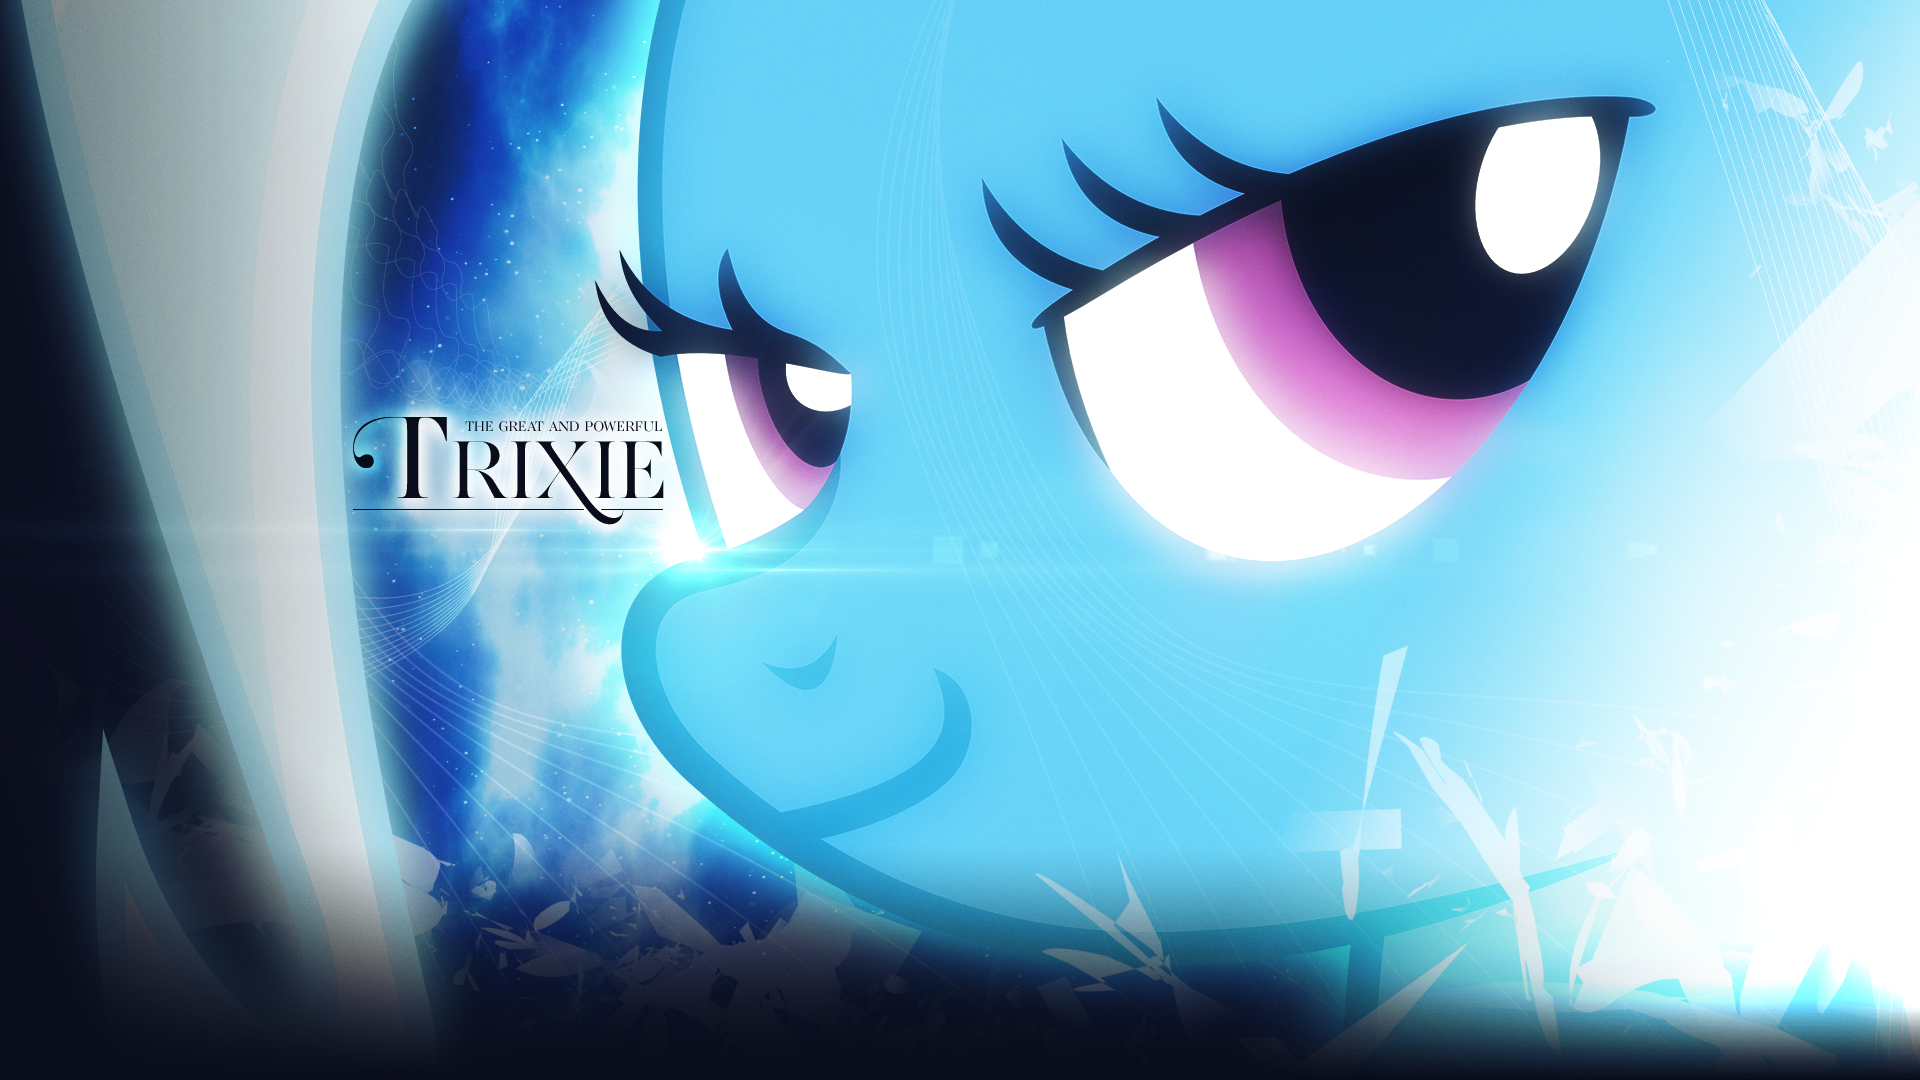 Trixie by dadio46, impala99, uxyd and WMill